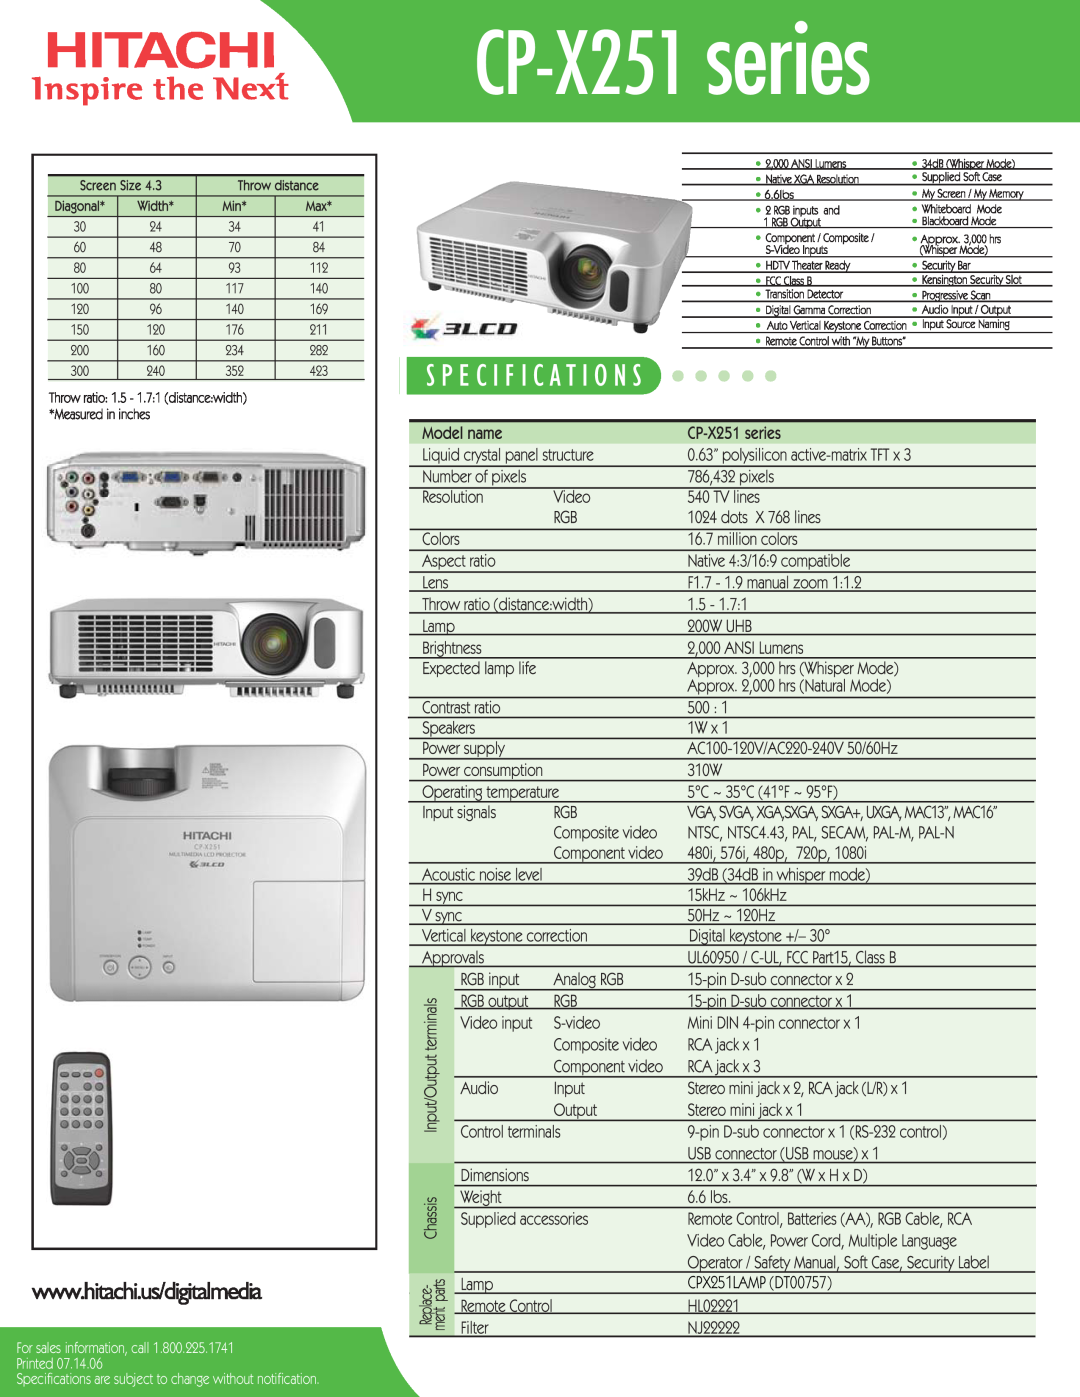 Hitachi specifications CP-X251 series, CPX251LAMP DT00757 